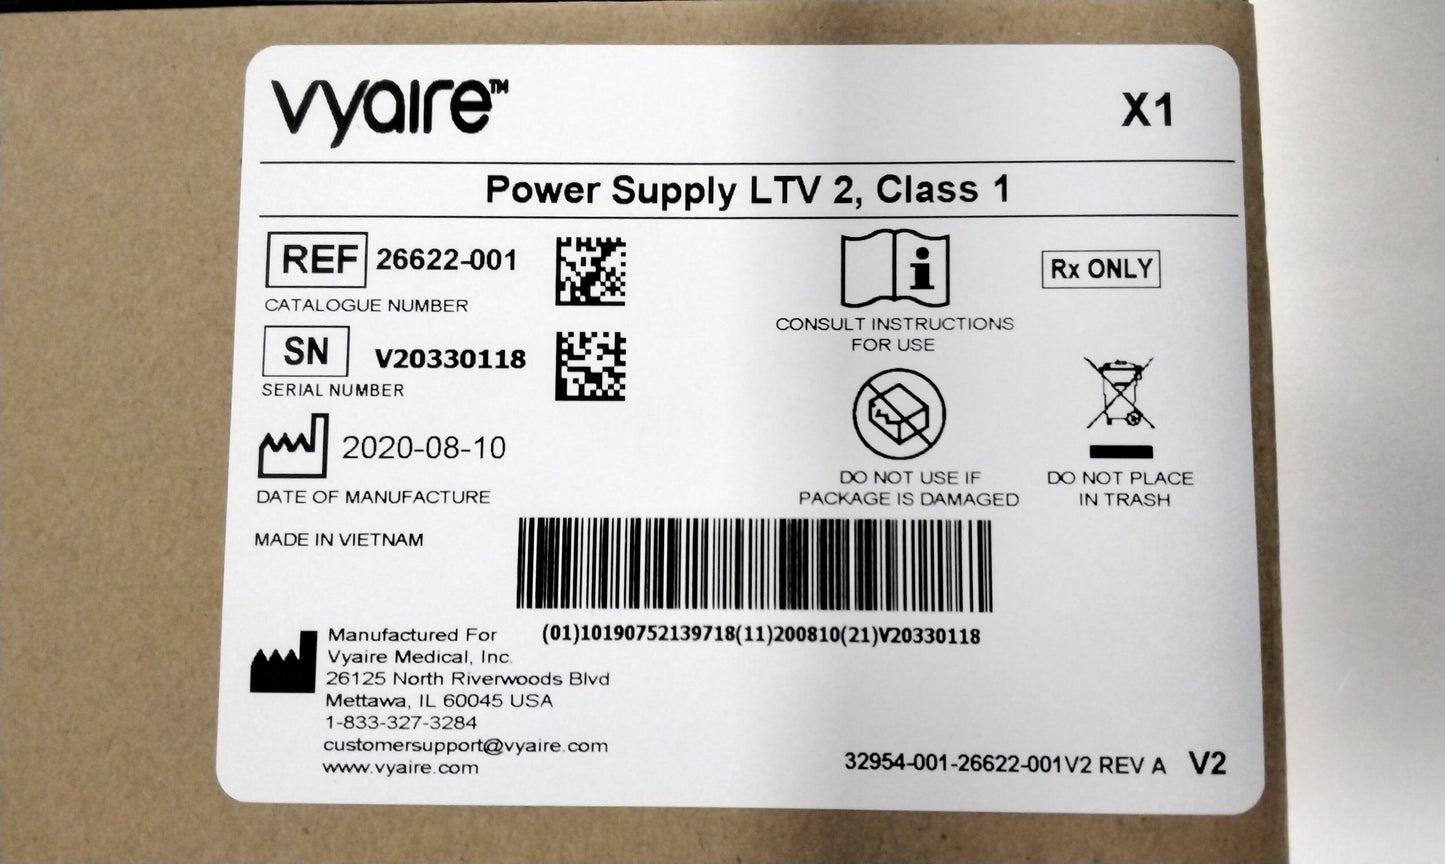 NEW Vyaire LTV 2 Power Supply with Power Cord 25312-001 with Free Shipping and Warranty - MBR Medicals